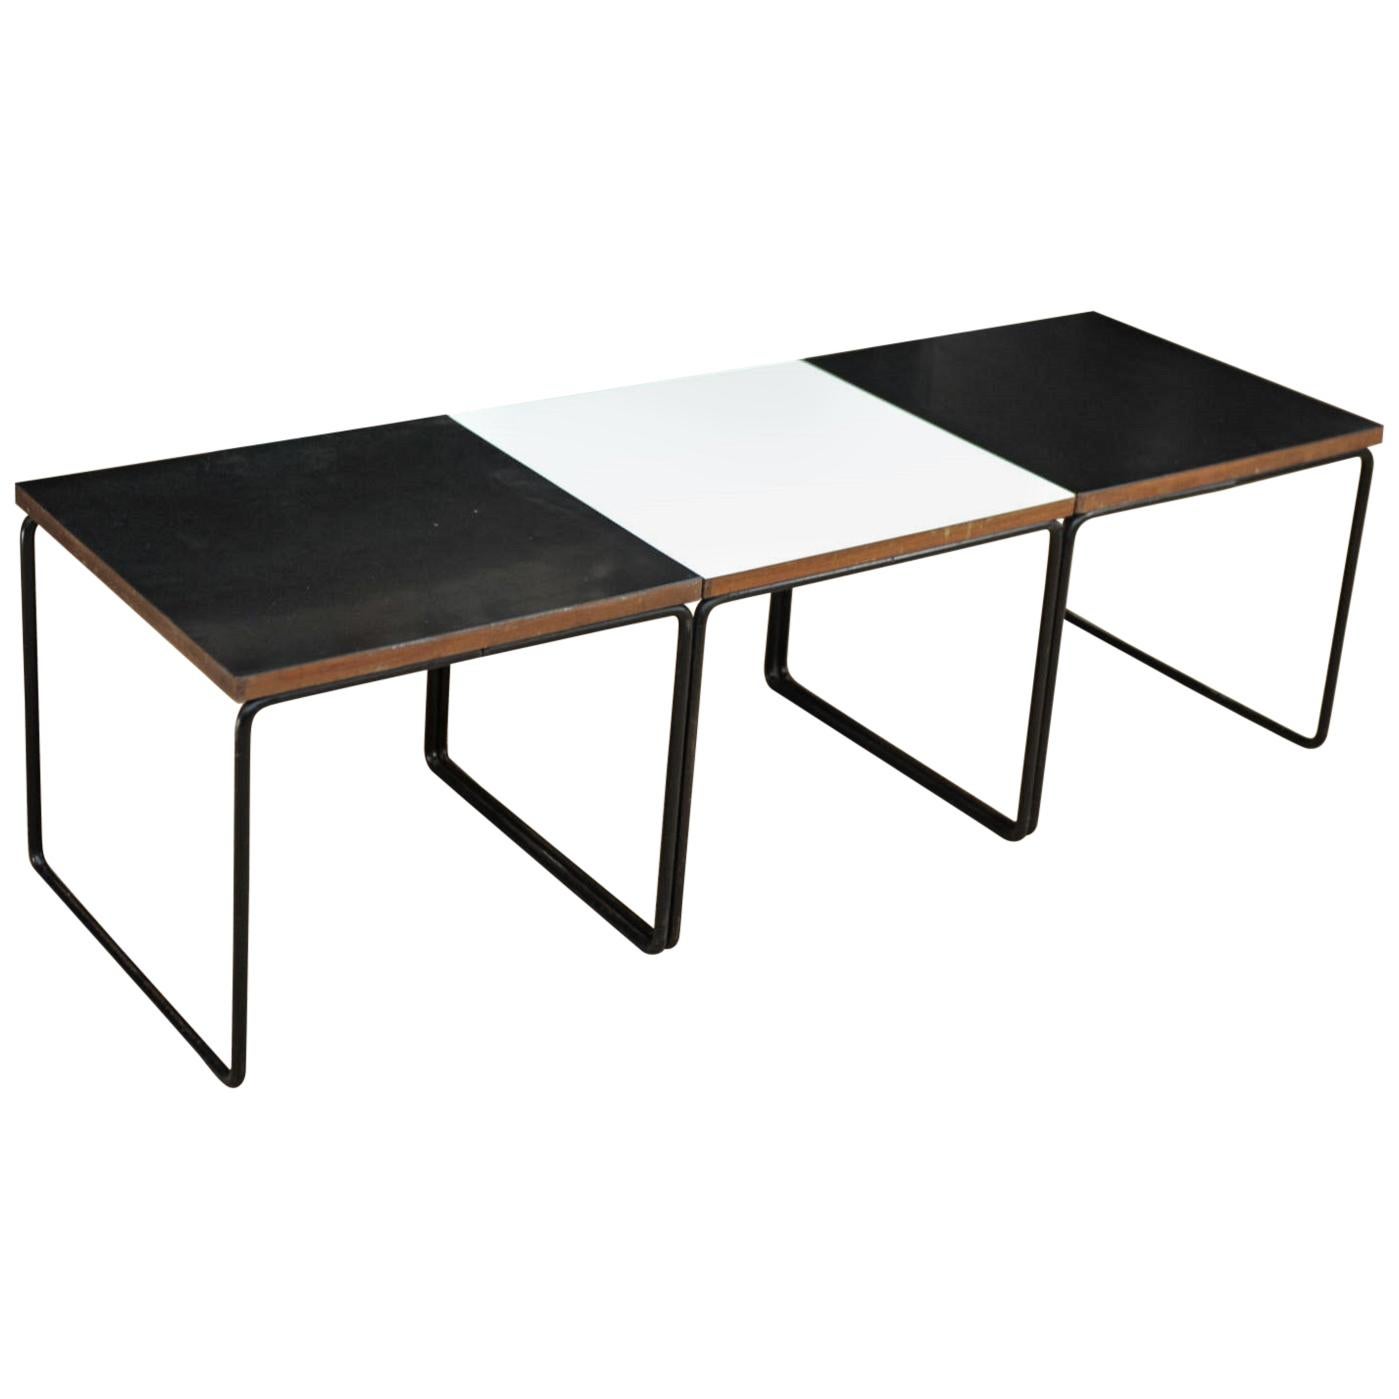 Set of 3 Coffee Table by Pierre Guariche for Steiner, France, circa 1950